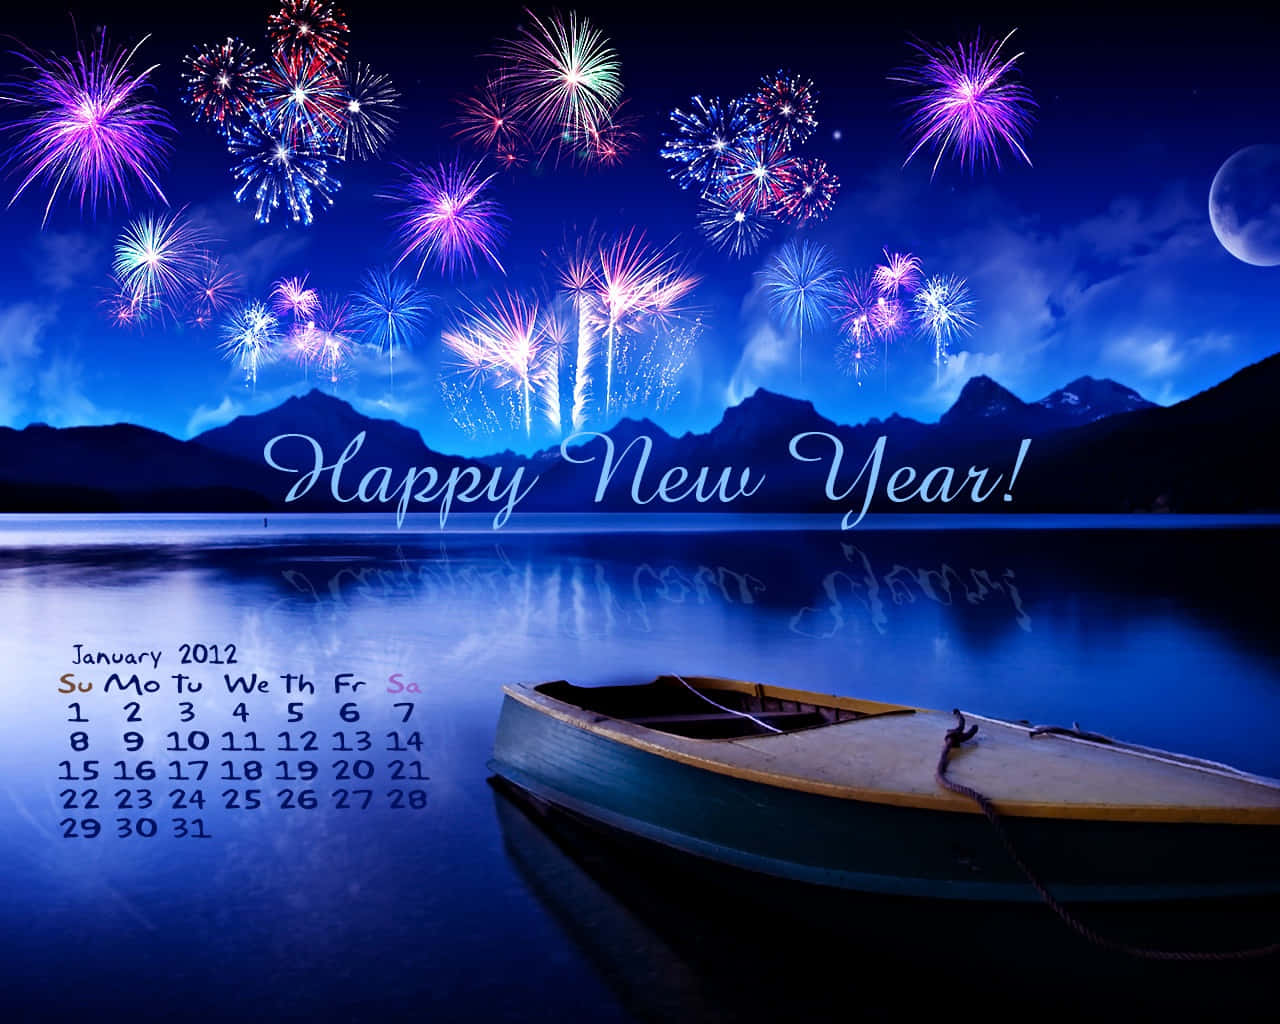 Welcome the start of the New Year with January